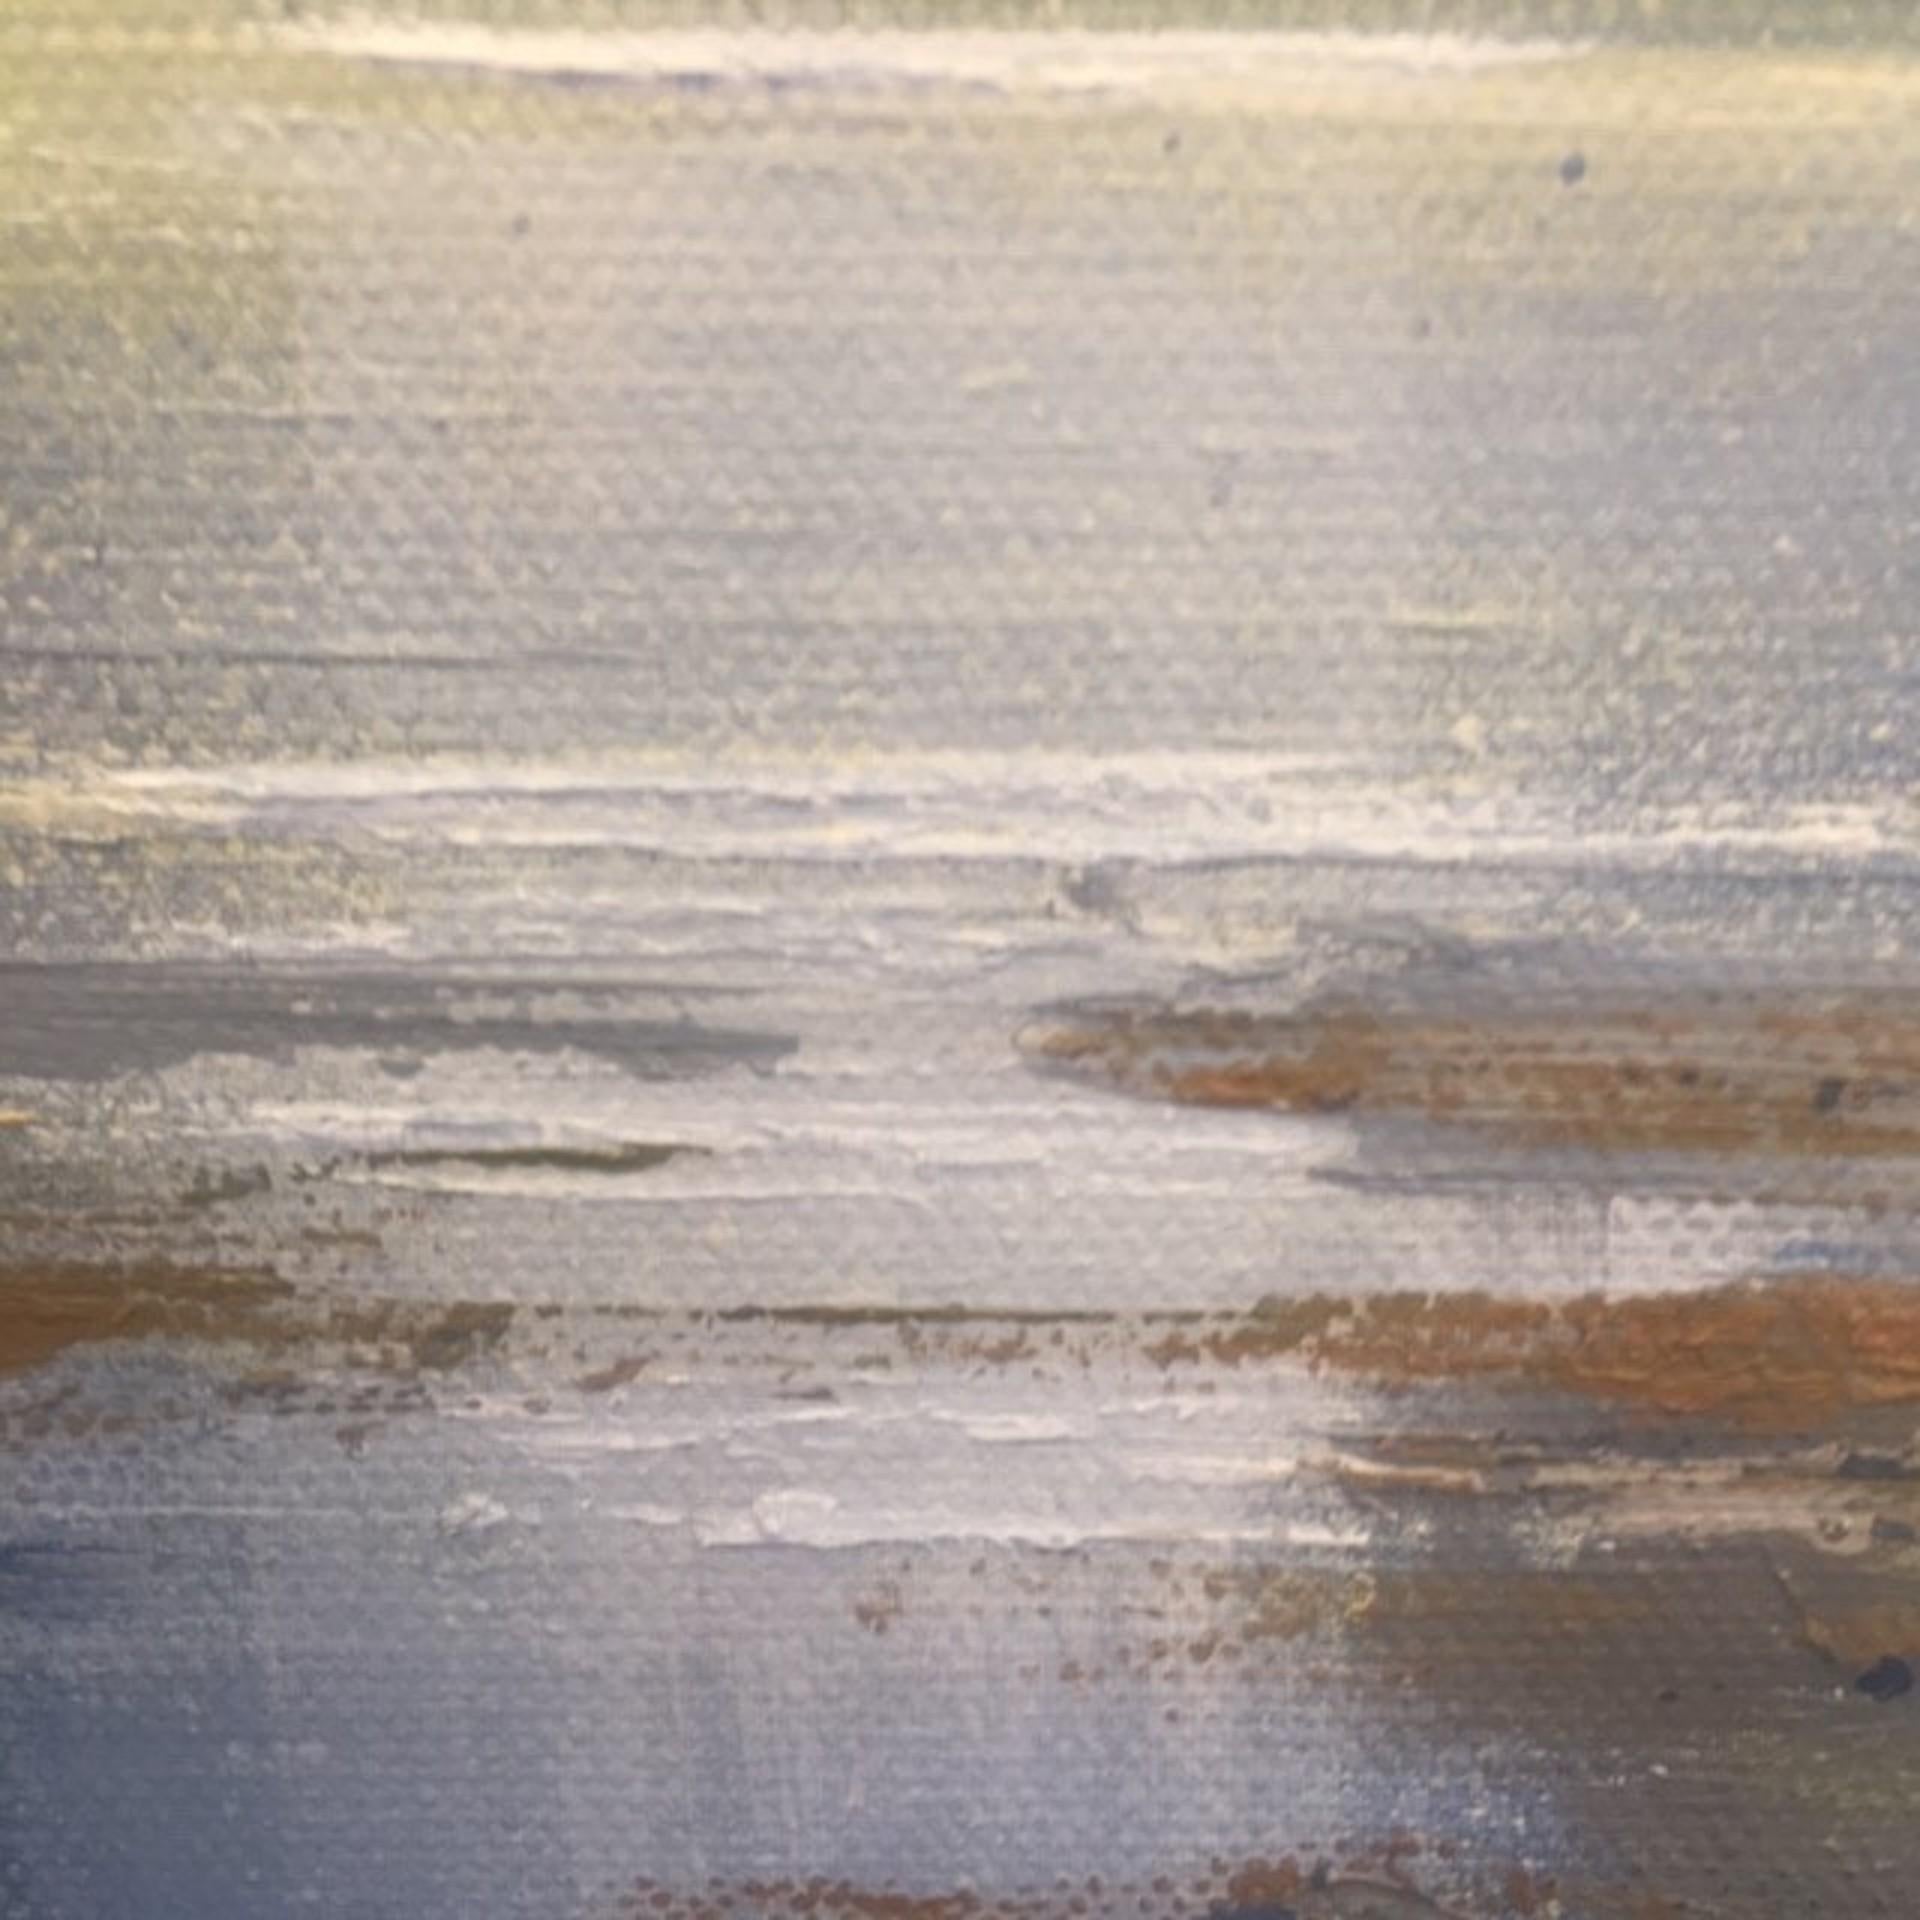 Jonathan Trim
Early Morning in the Estuary
Original Landscape Painting
Acrylic Paint on Canvas
Canvas Size: H 80cm x W 80cm
Sold Unframed
(Please note that in situ images are purely an indication of how a piece may look.)

Early morning in the